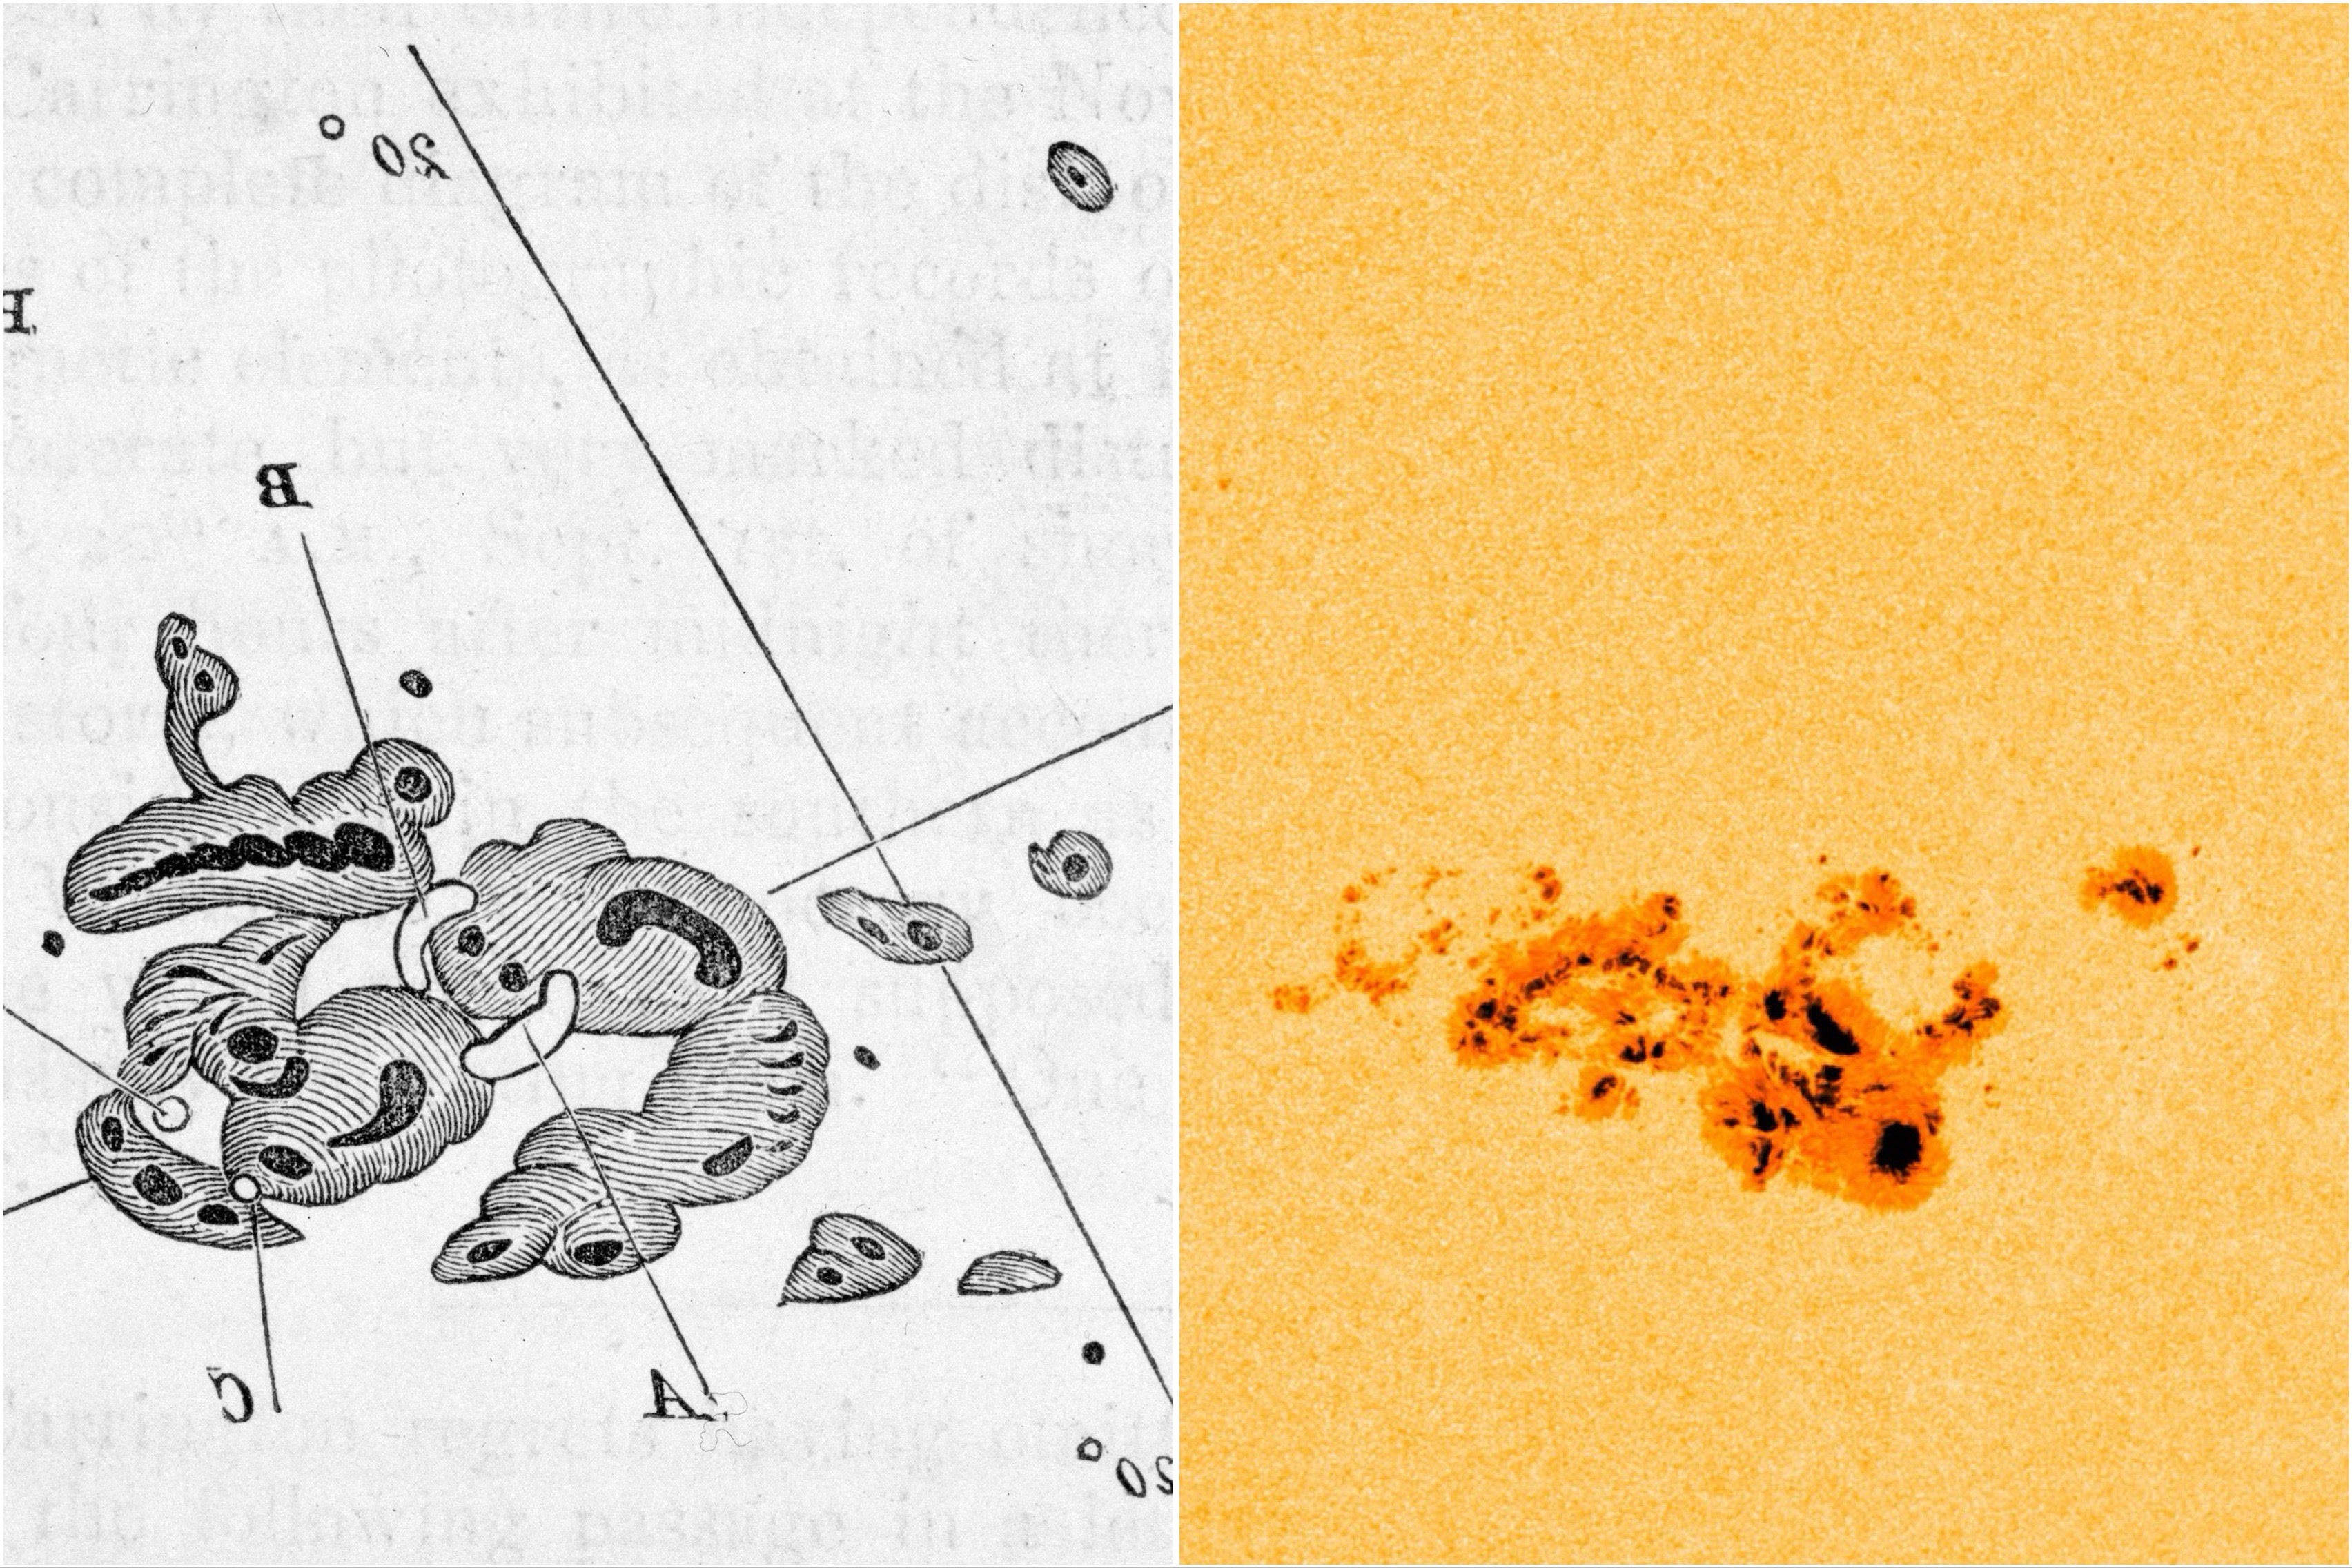 A recent cluster of sunpots called AR3664 (right panel) rival the size of the one that caused the infamous 1859 Carrington Event (shown on the left and flipped for comparison).